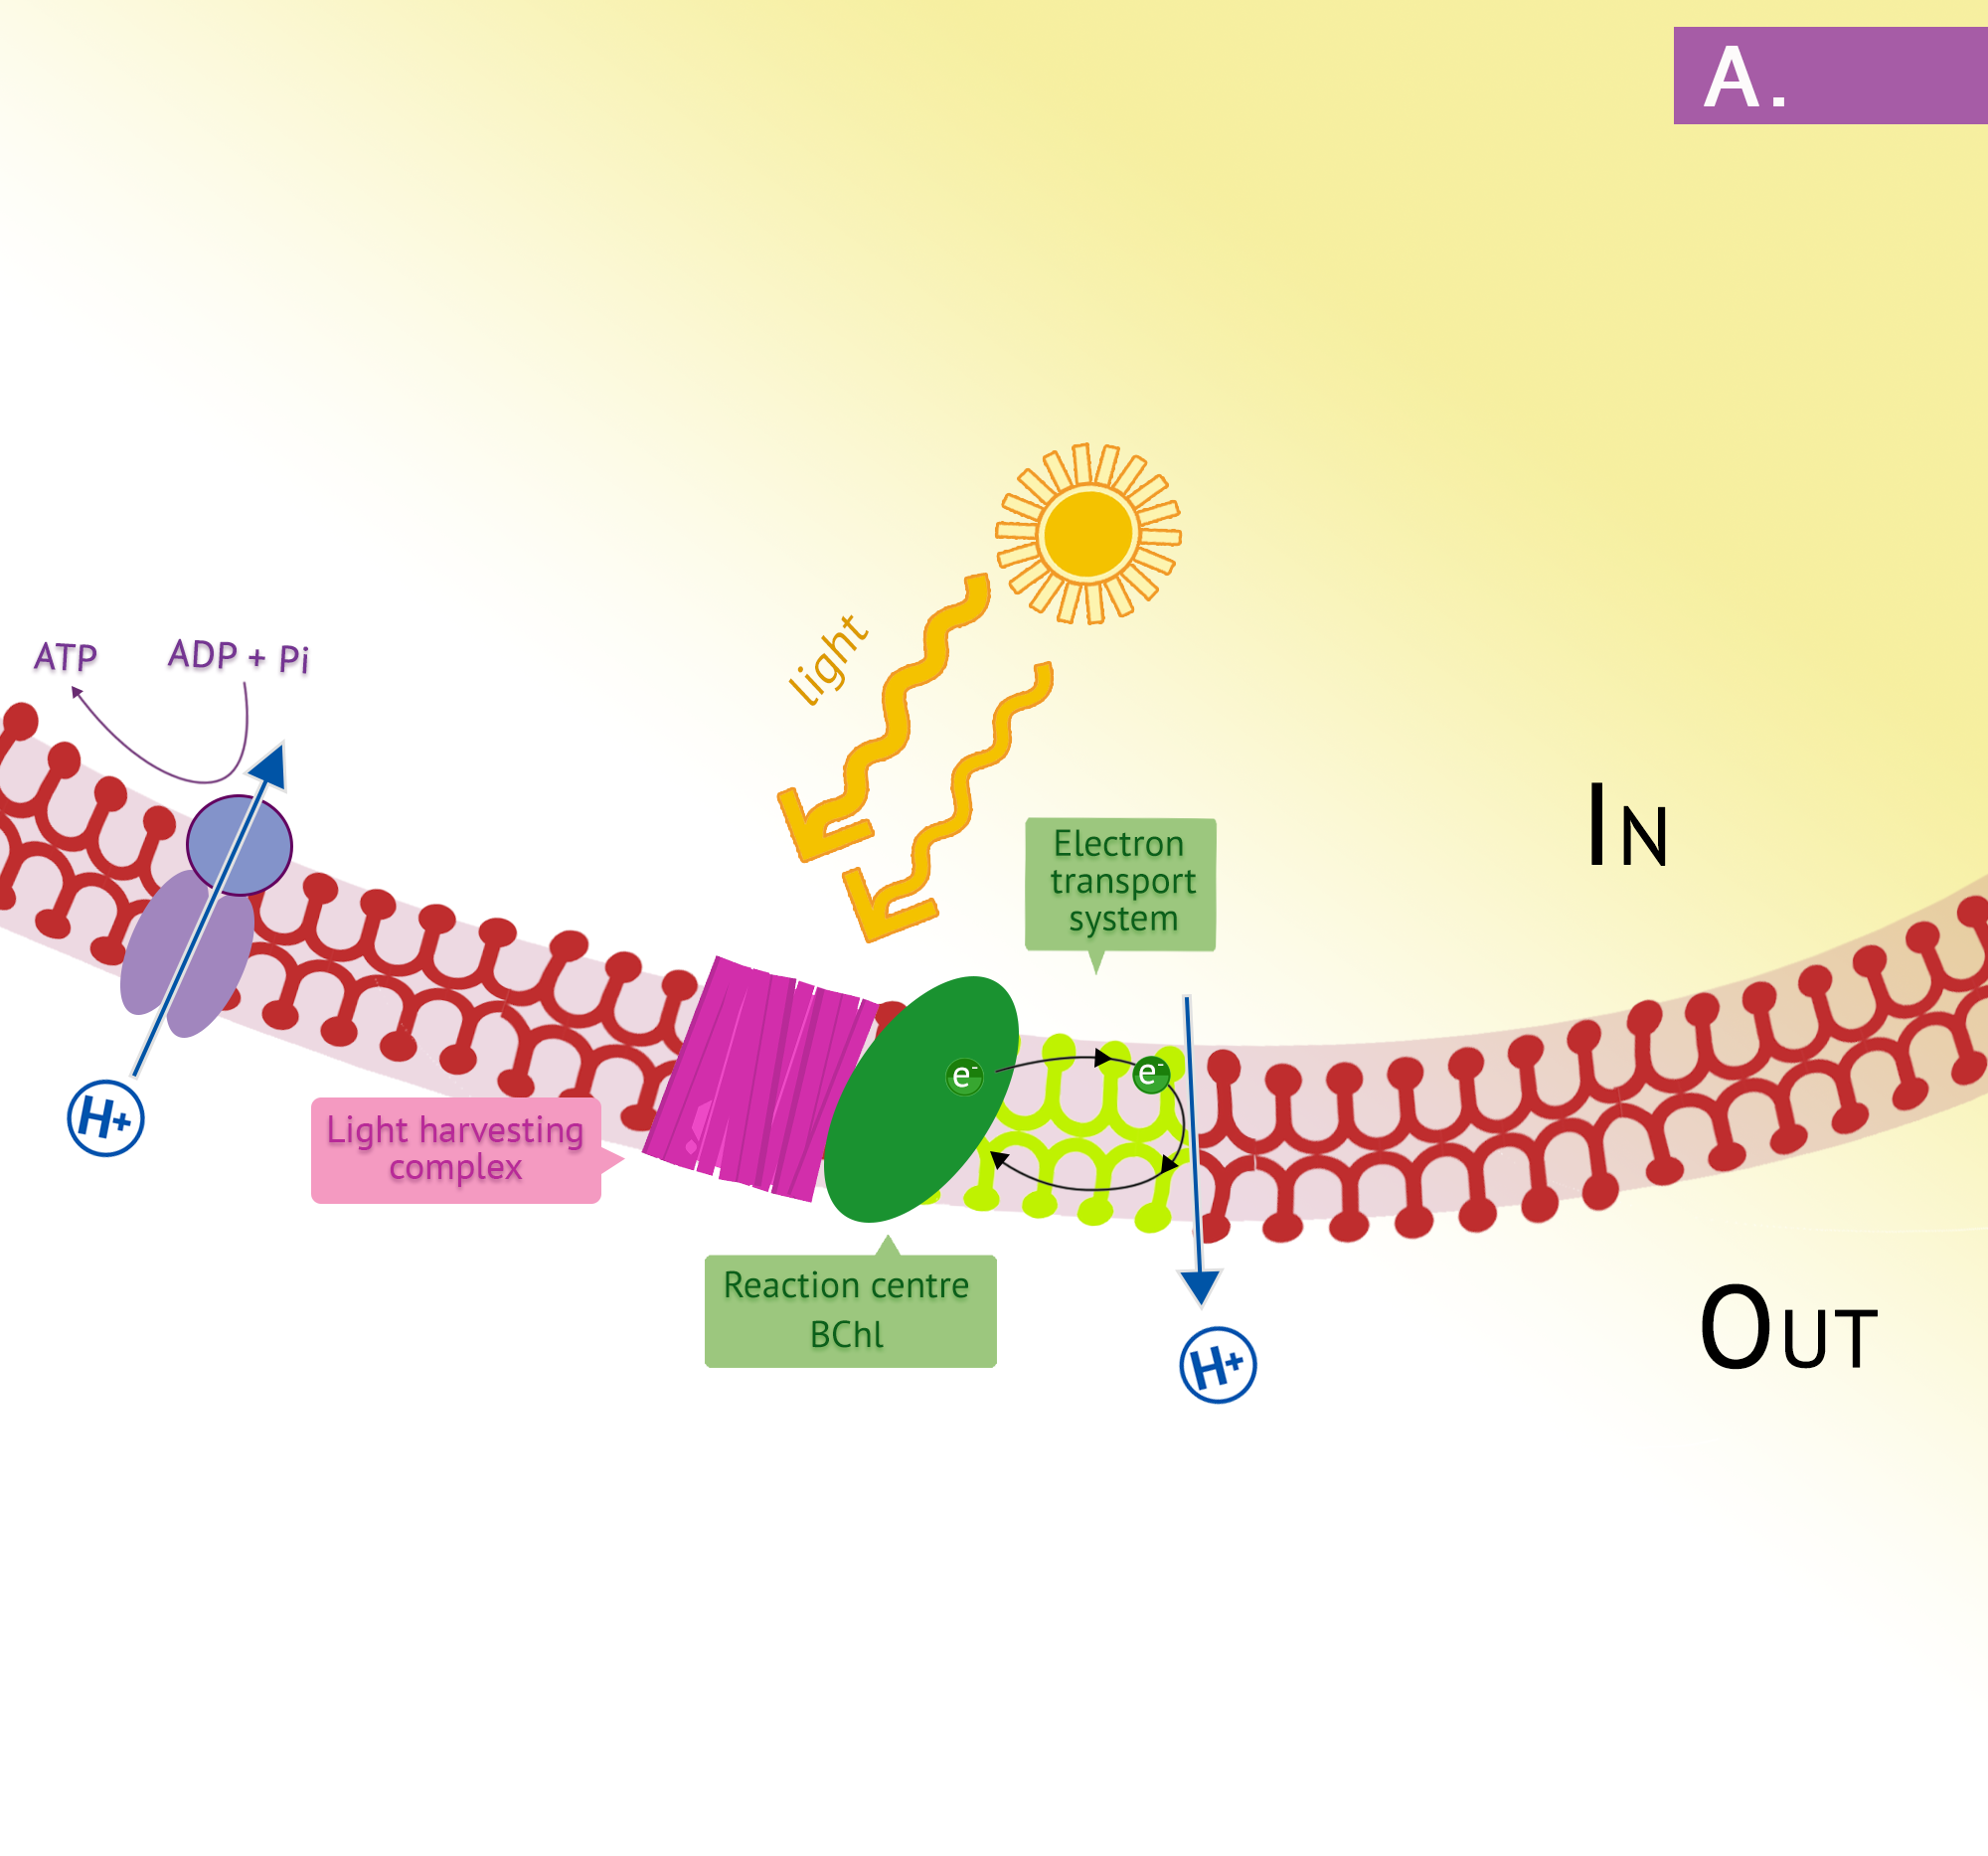 Panel a depicts the purple electron transport chain. Light hits the light-harvesting complex in the plasma membrane, leading to photoionization. Electrons cycle through the chains then back to the reaction centre bacteriochlorophyll, generating PMF.